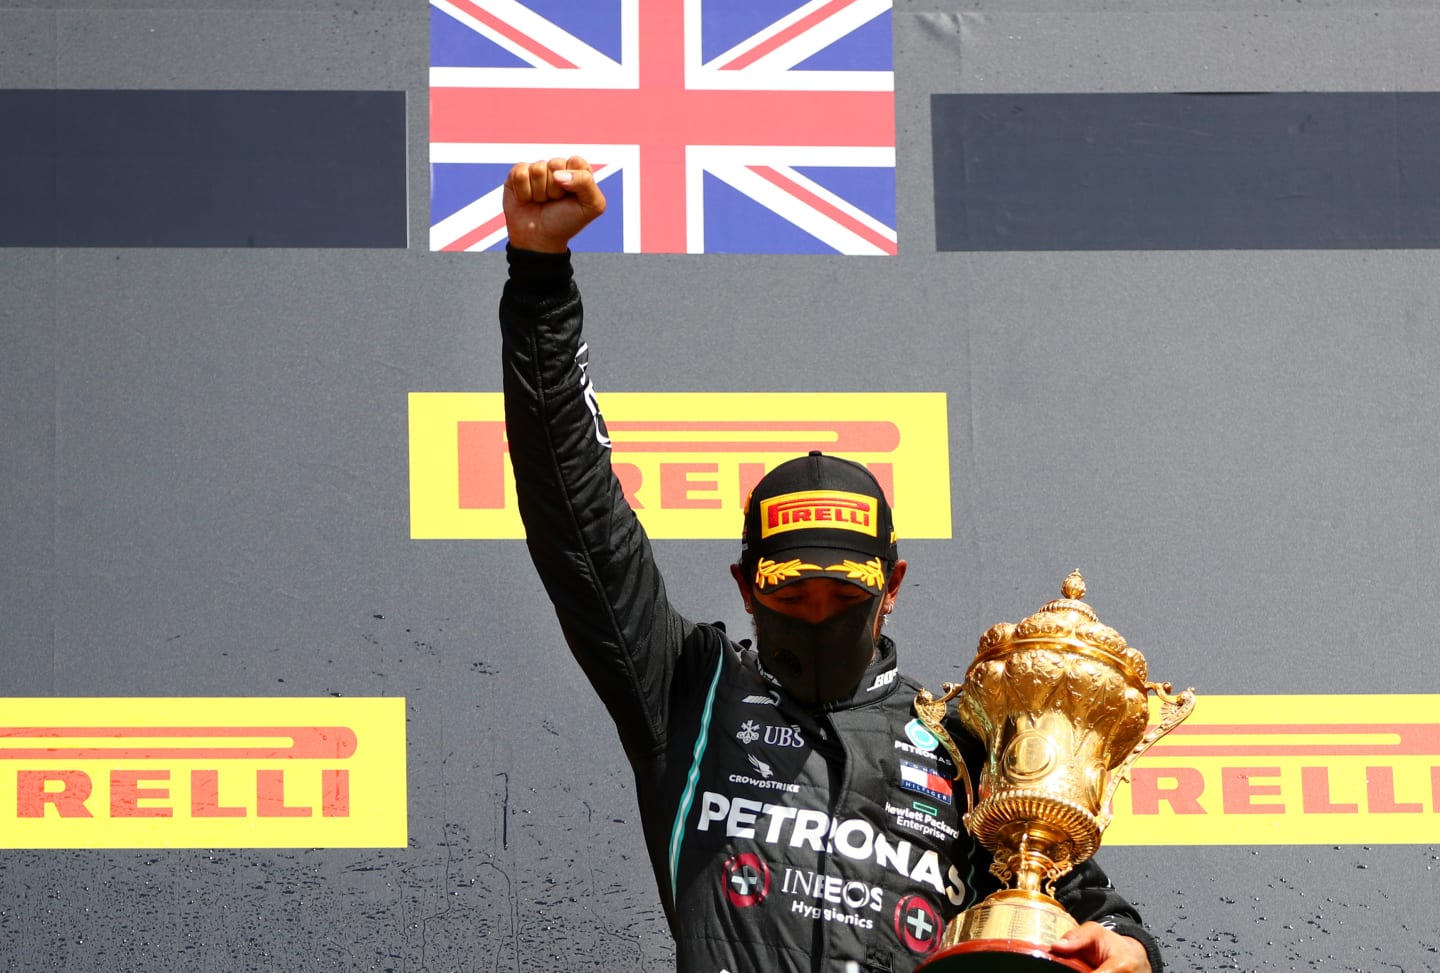 NORTHAMPTON, ENGLAND - AUGUST 02: Lewis Hamilton of Great Britain and Mercedes GP raises his fist as he celebrates on the podium after winning the Formula One Grand Prix of Hungary at Silverstone on August 02, 2020 in Northampton, England. (Photo by Dan Istitene - Formula 1/Formula 1 via Getty Images)